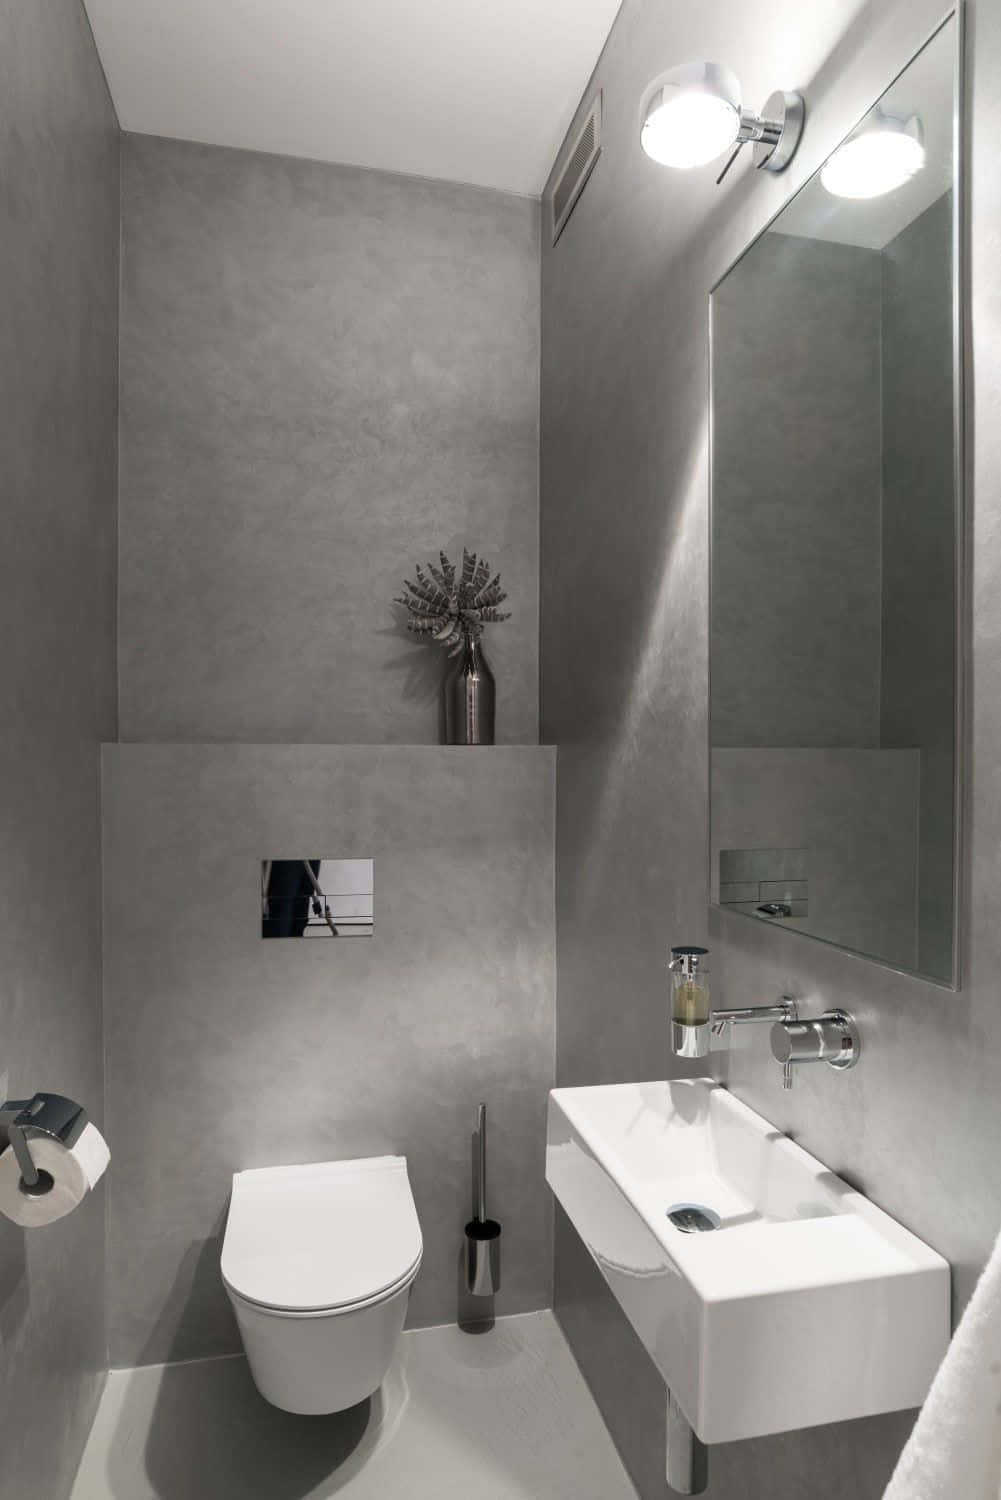 A Clean and Modern Toilet in a Stylish Bathroom